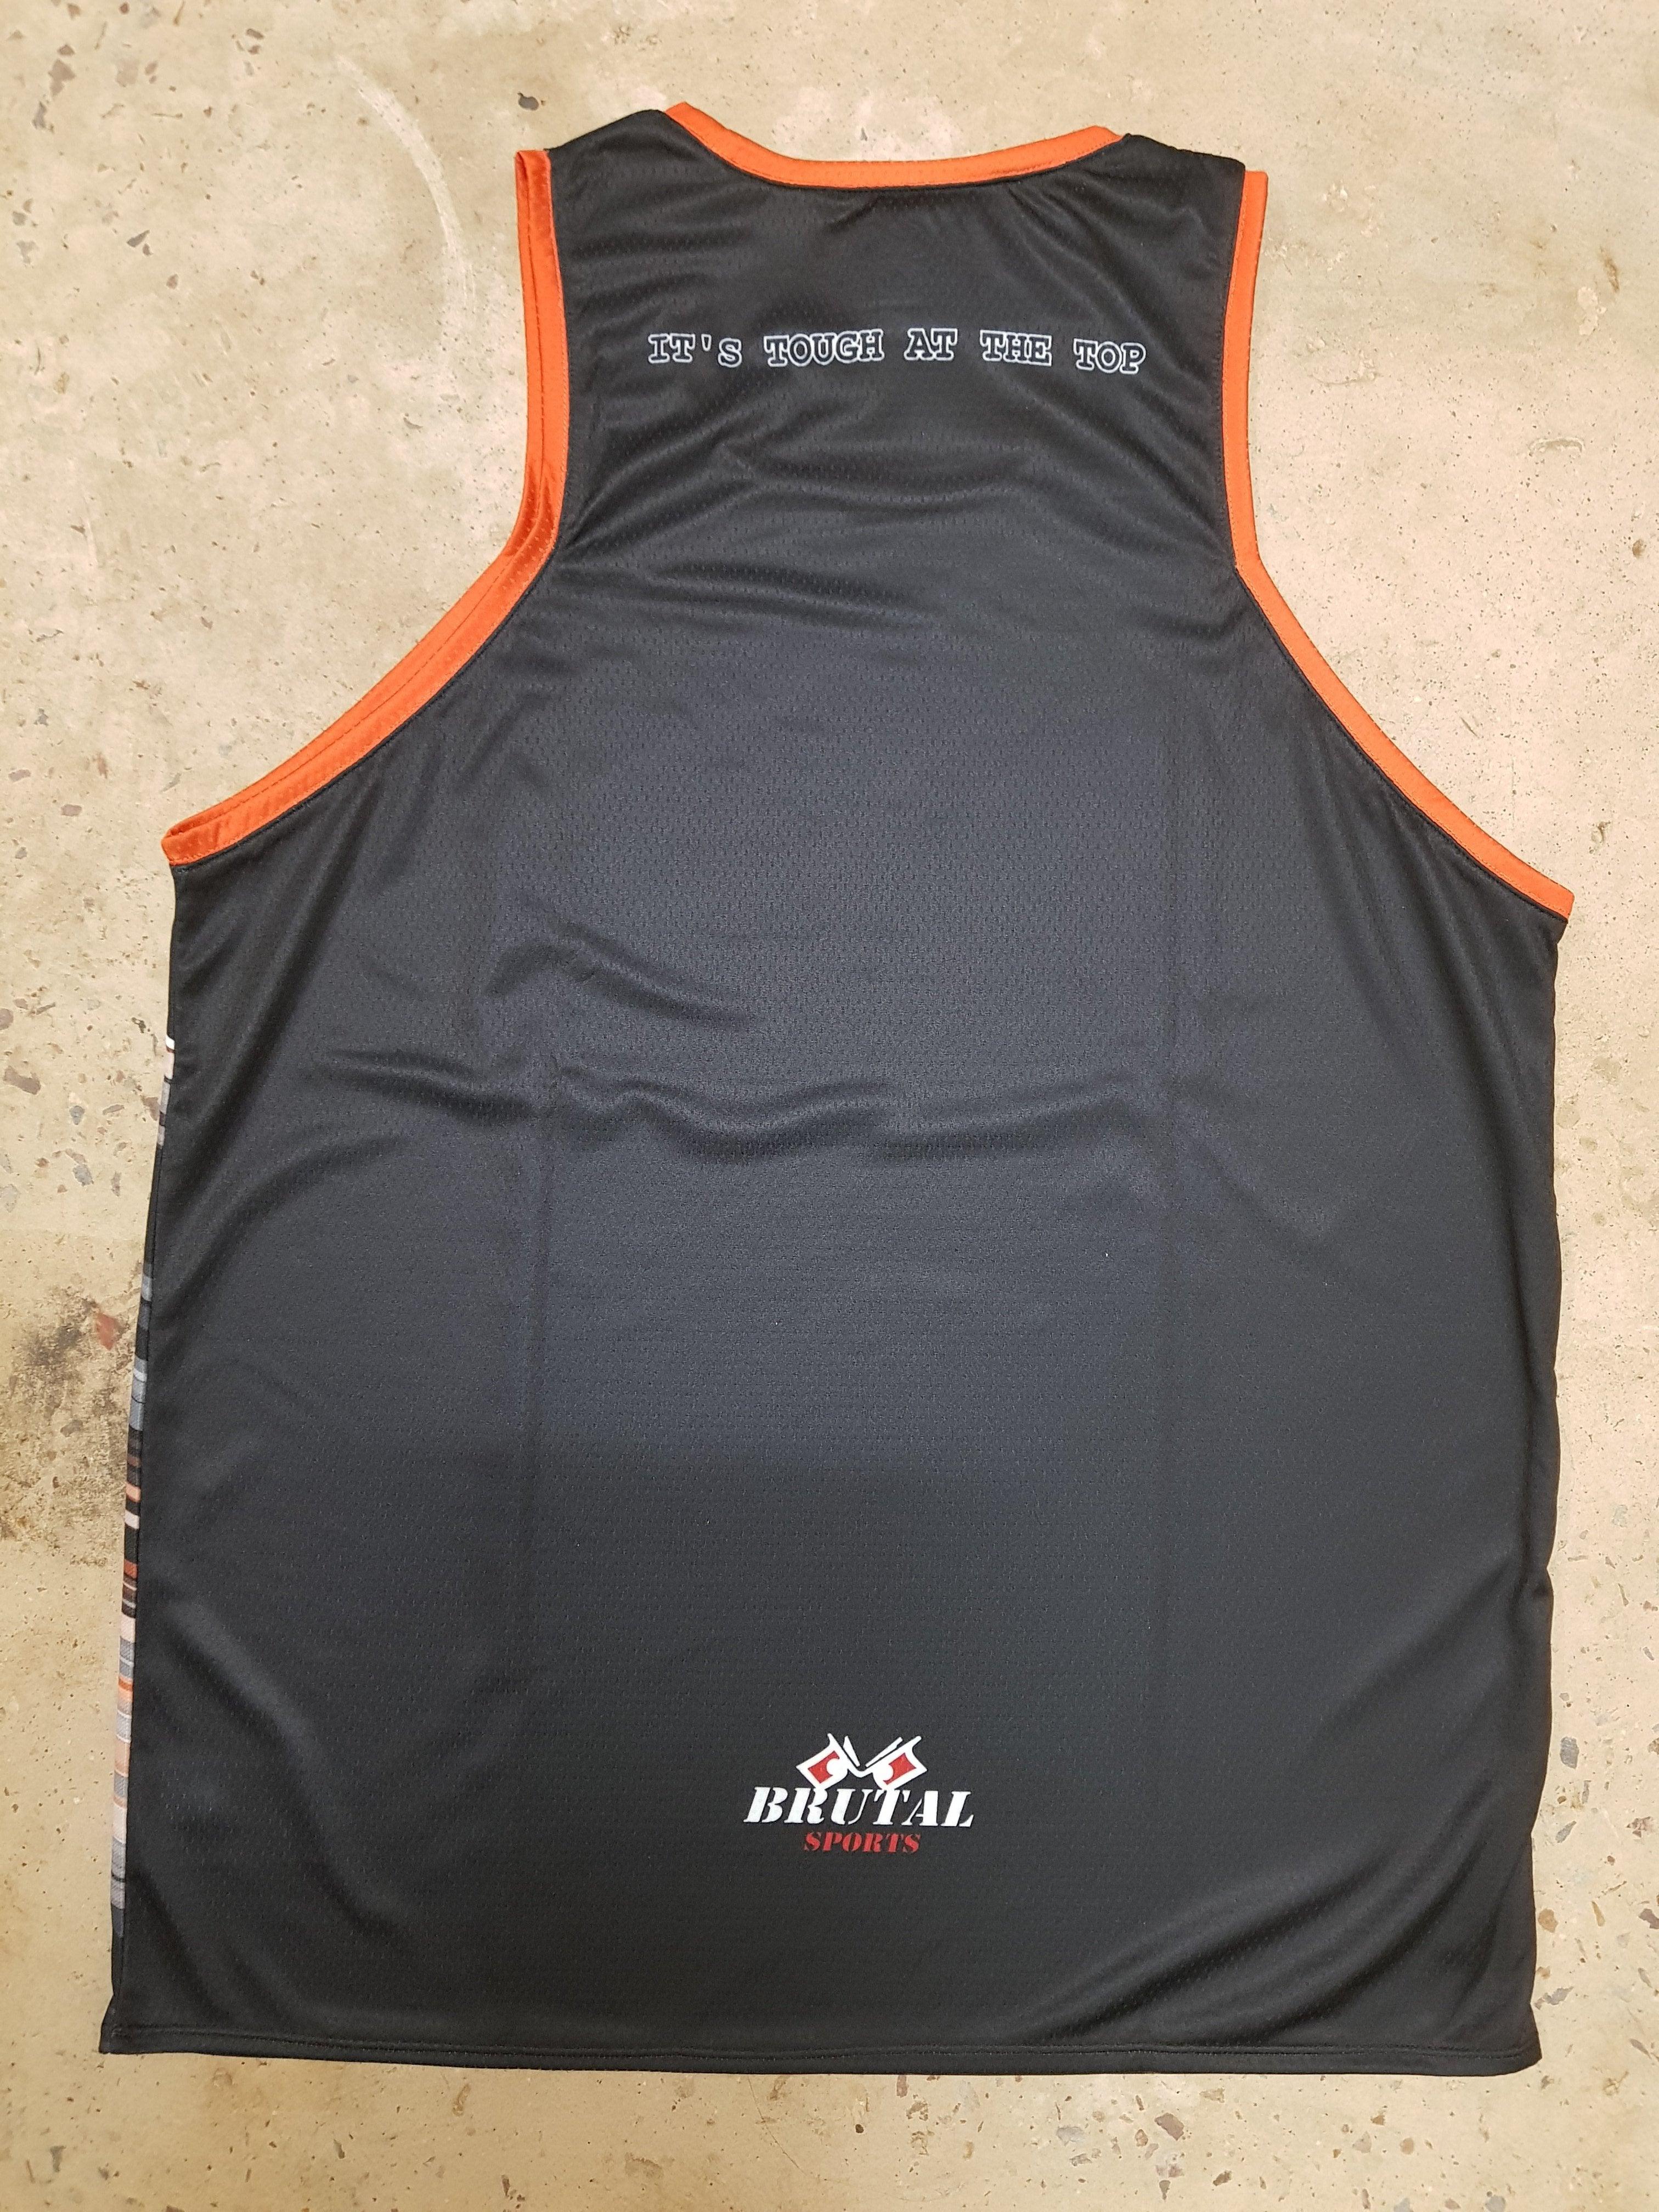 Territory Rugby Singlet - The Rugby Shop Darwin